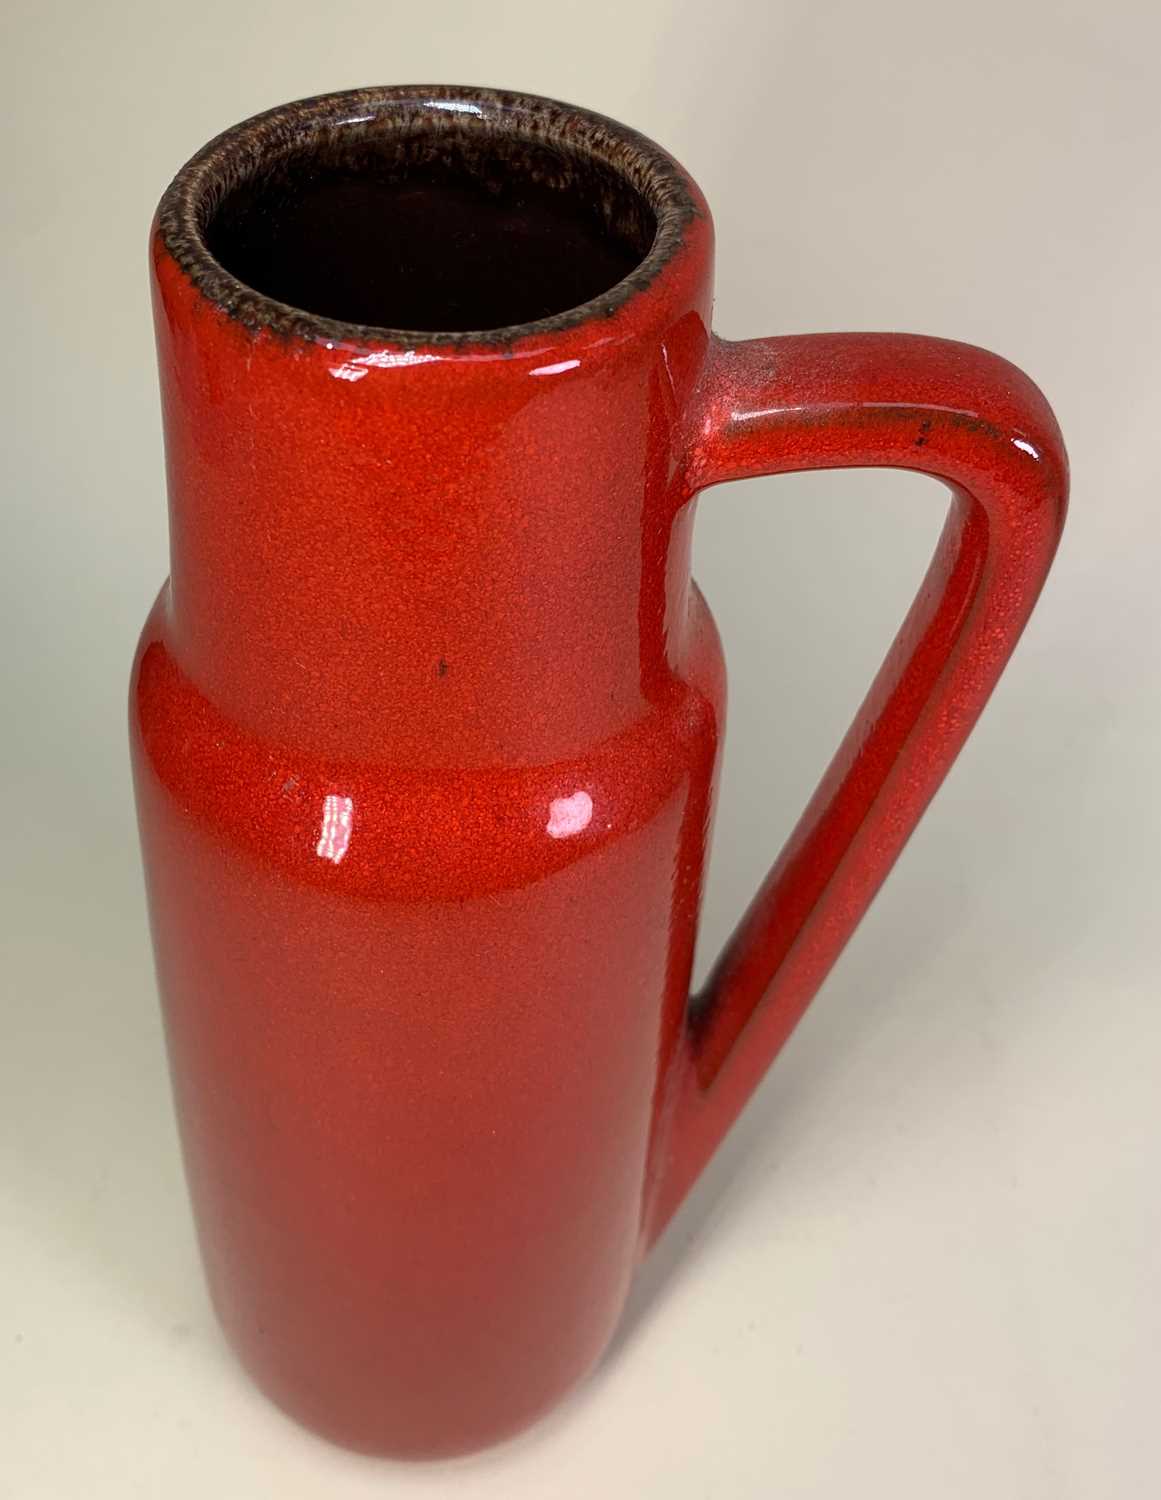 MID CENTURY POTTERY WGP KERAMICS COLLECTION including one Scheurich 275-28 solid red glazed vase - Image 10 of 20